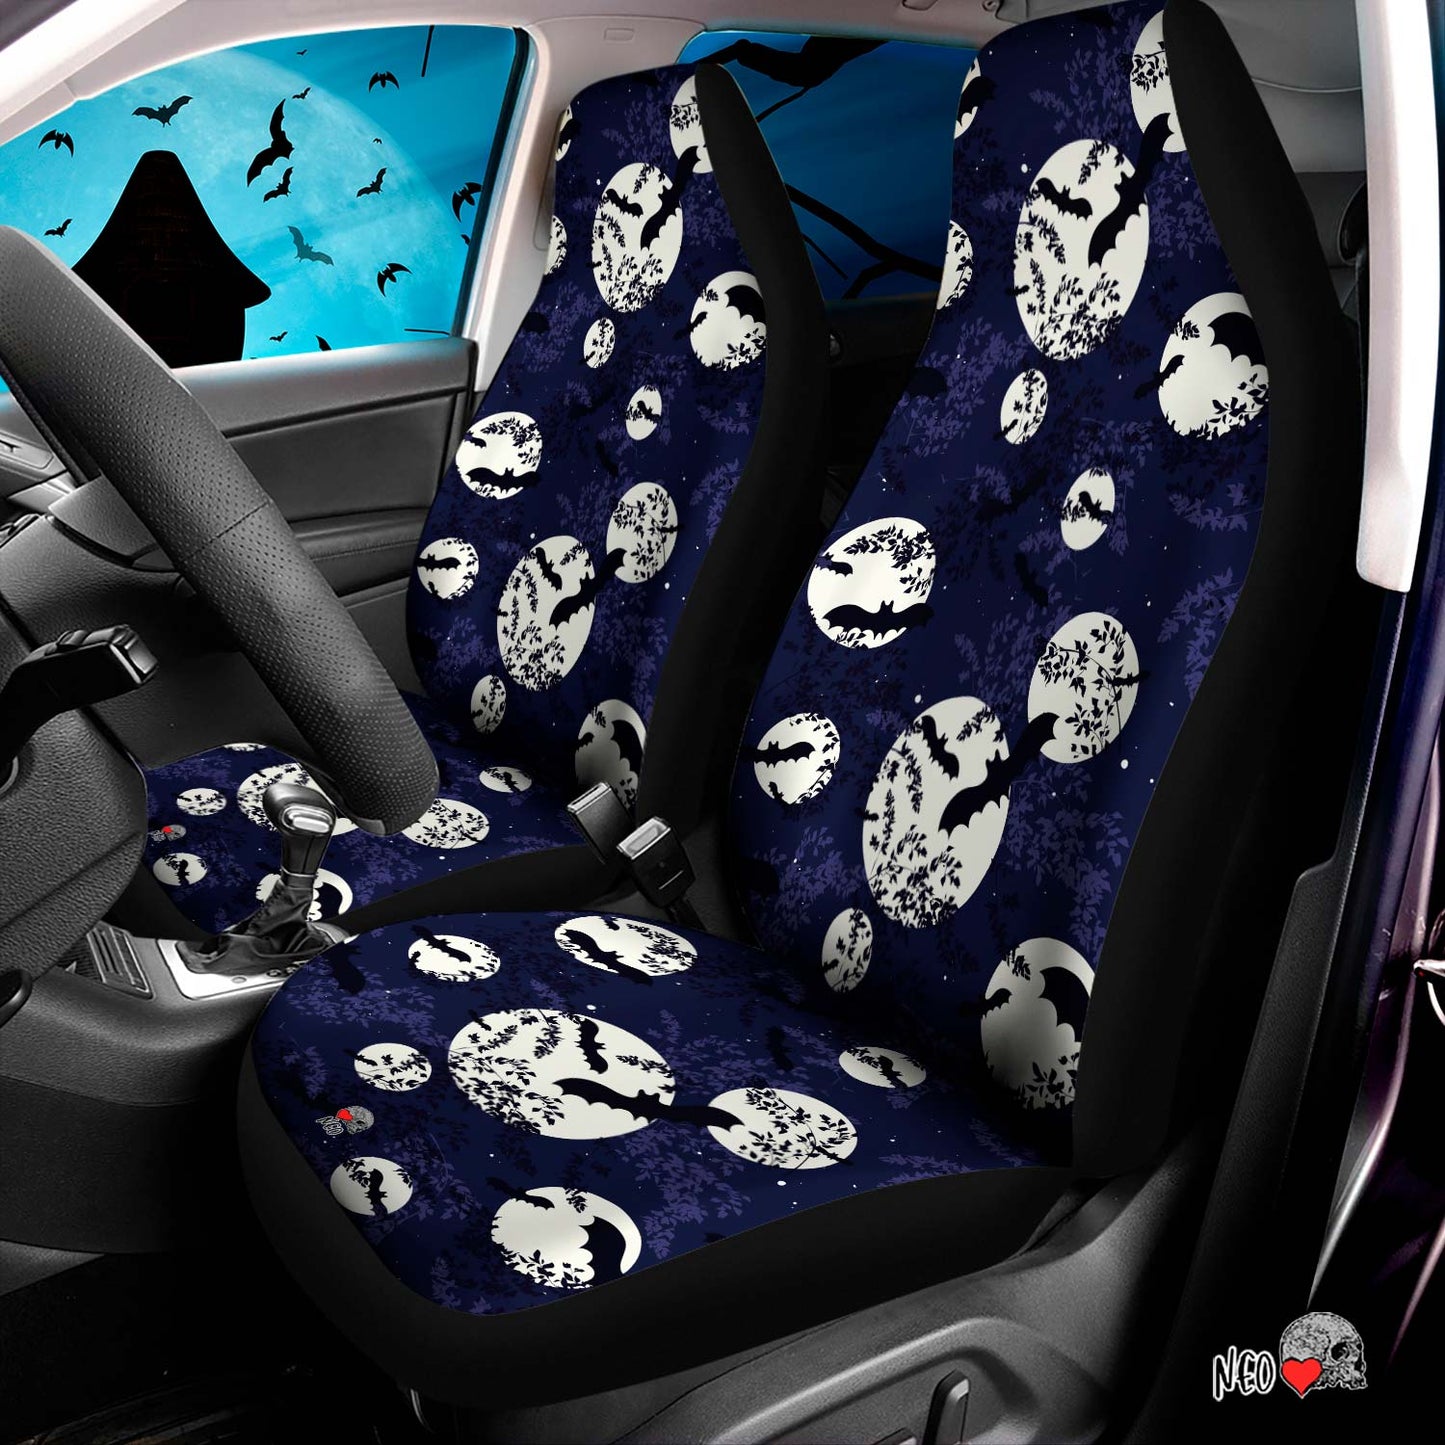 Night sky and bats Car Seat Covers